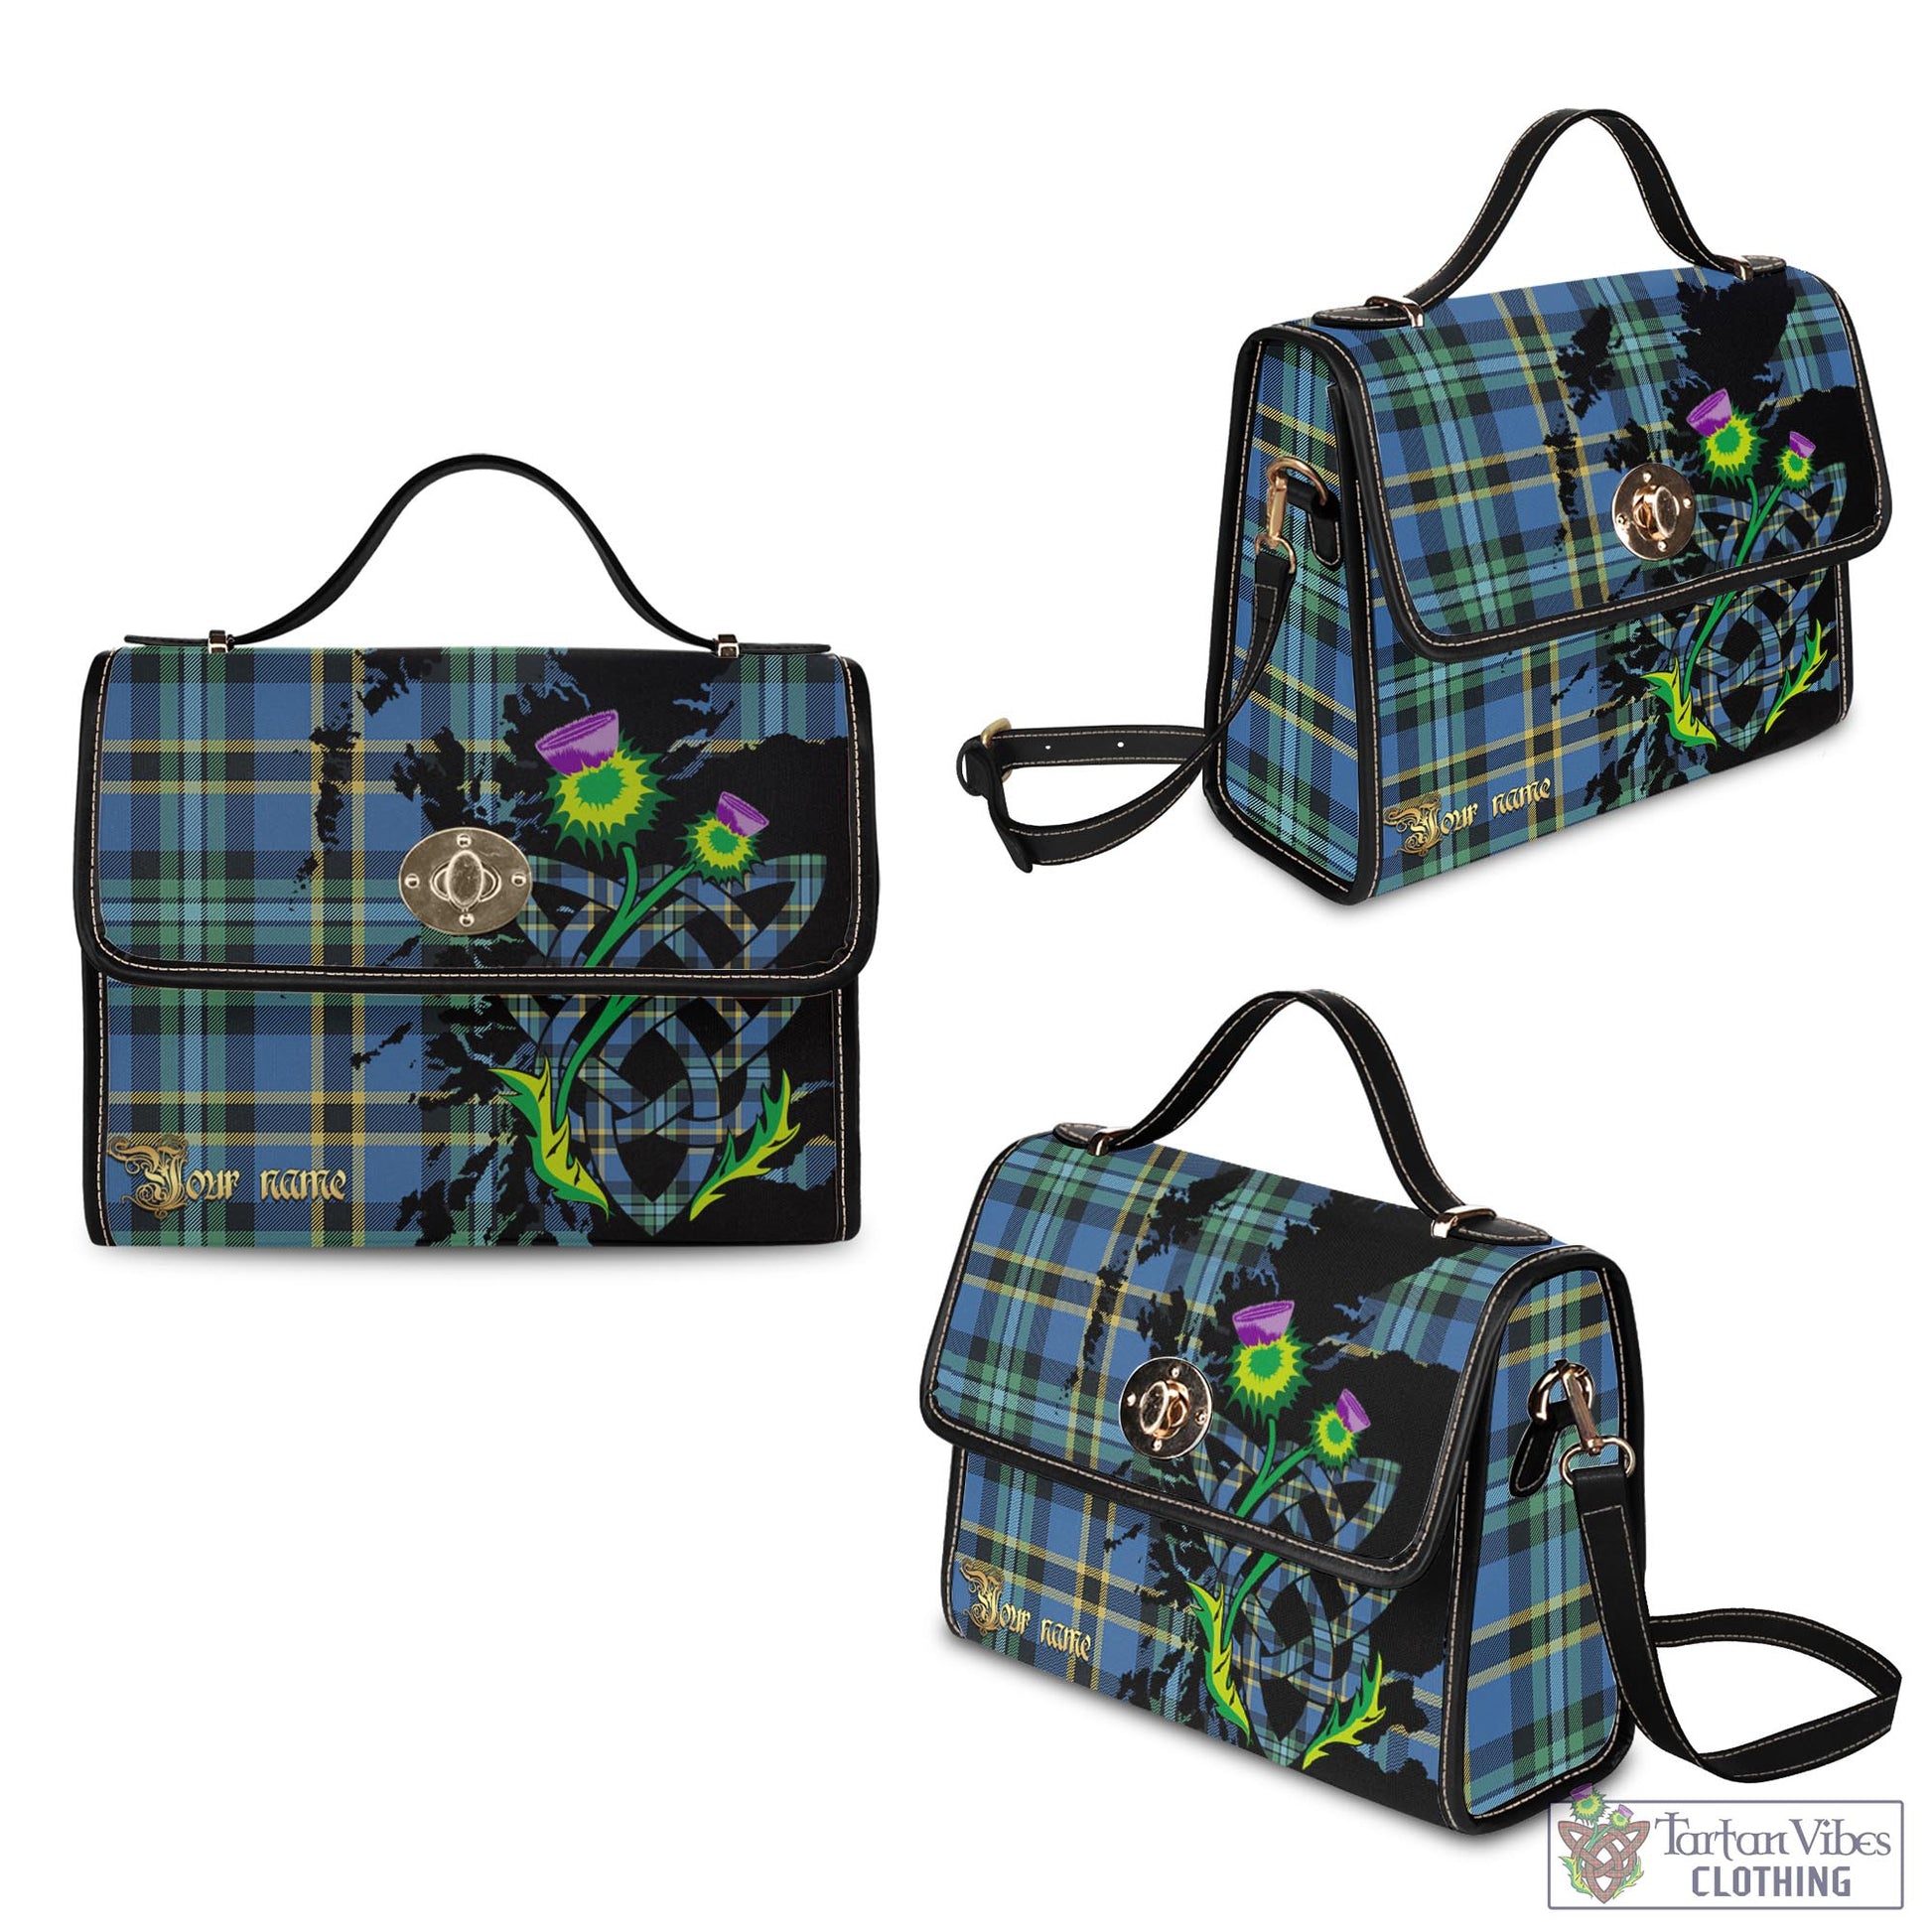 Tartan Vibes Clothing Hope Ancient Tartan Waterproof Canvas Bag with Scotland Map and Thistle Celtic Accents